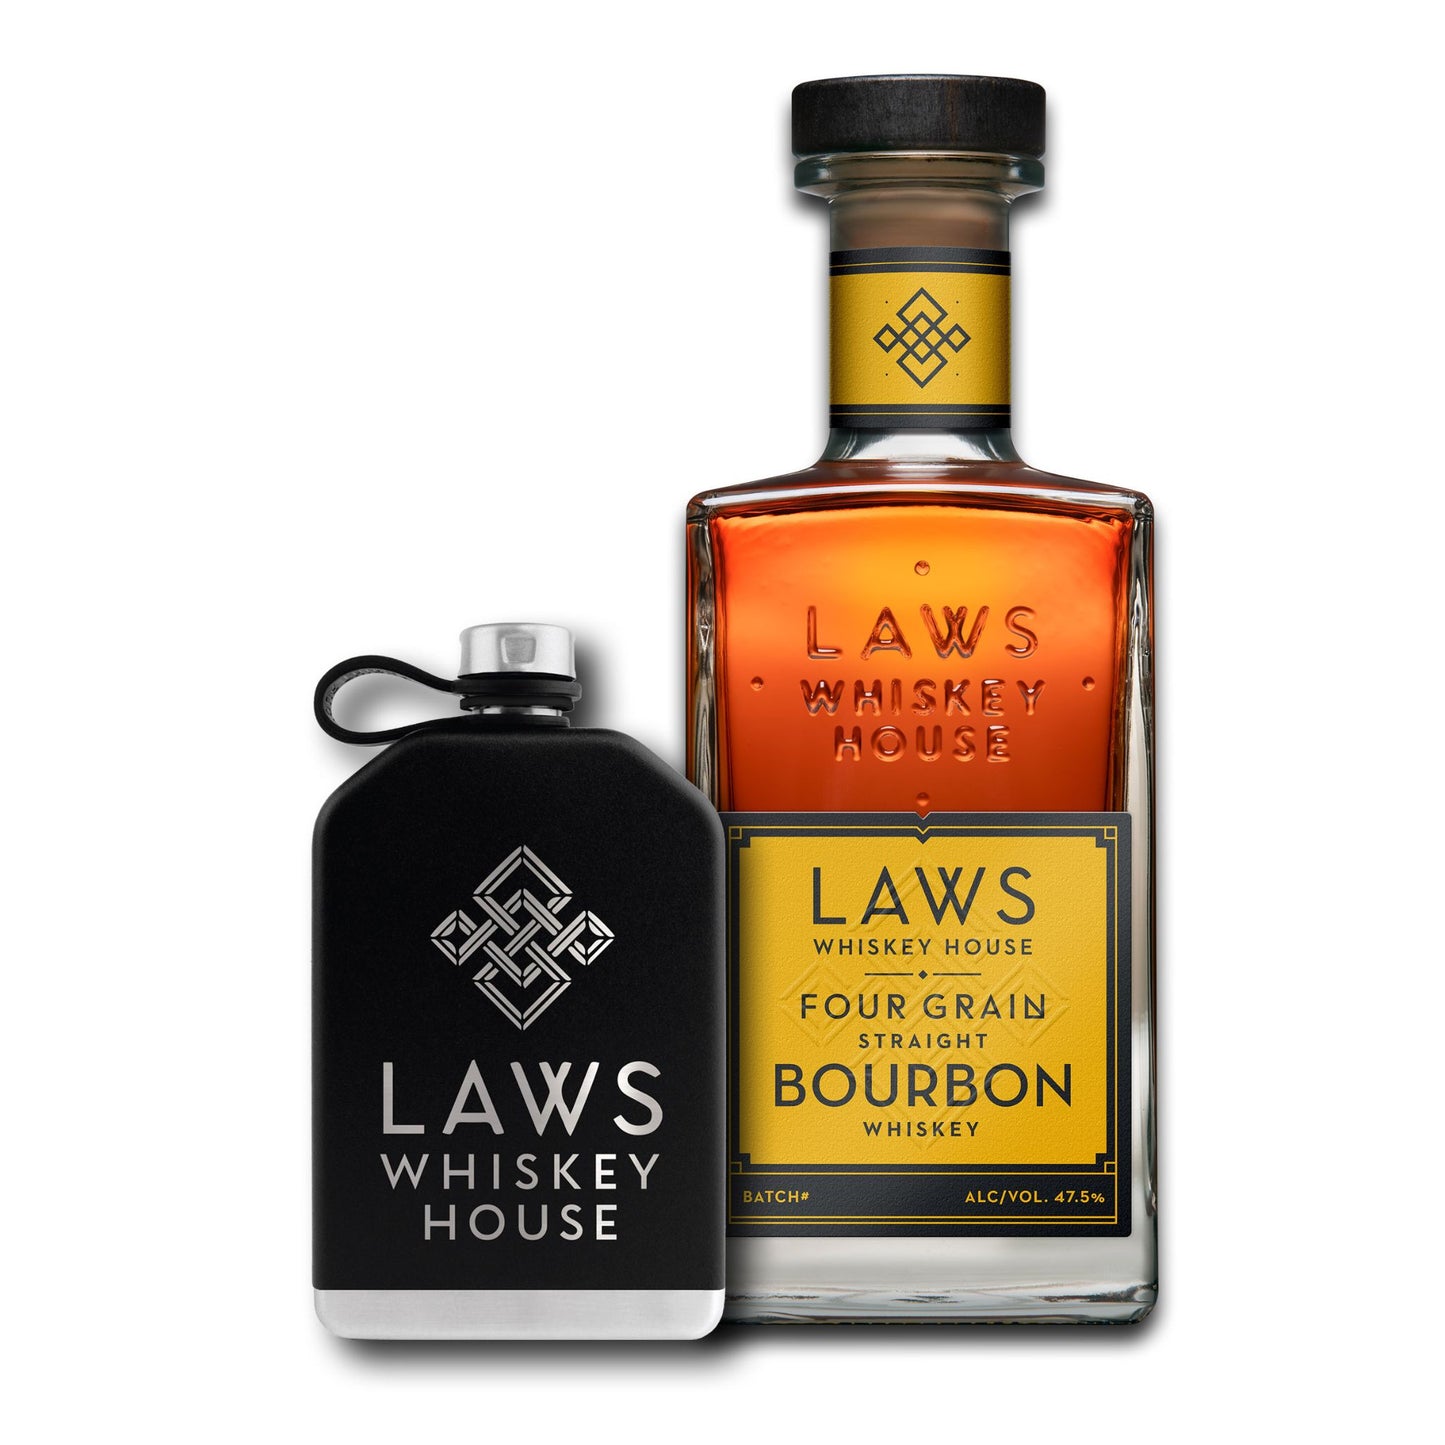 Limited: Four Grain Straight Bourbon and Flask